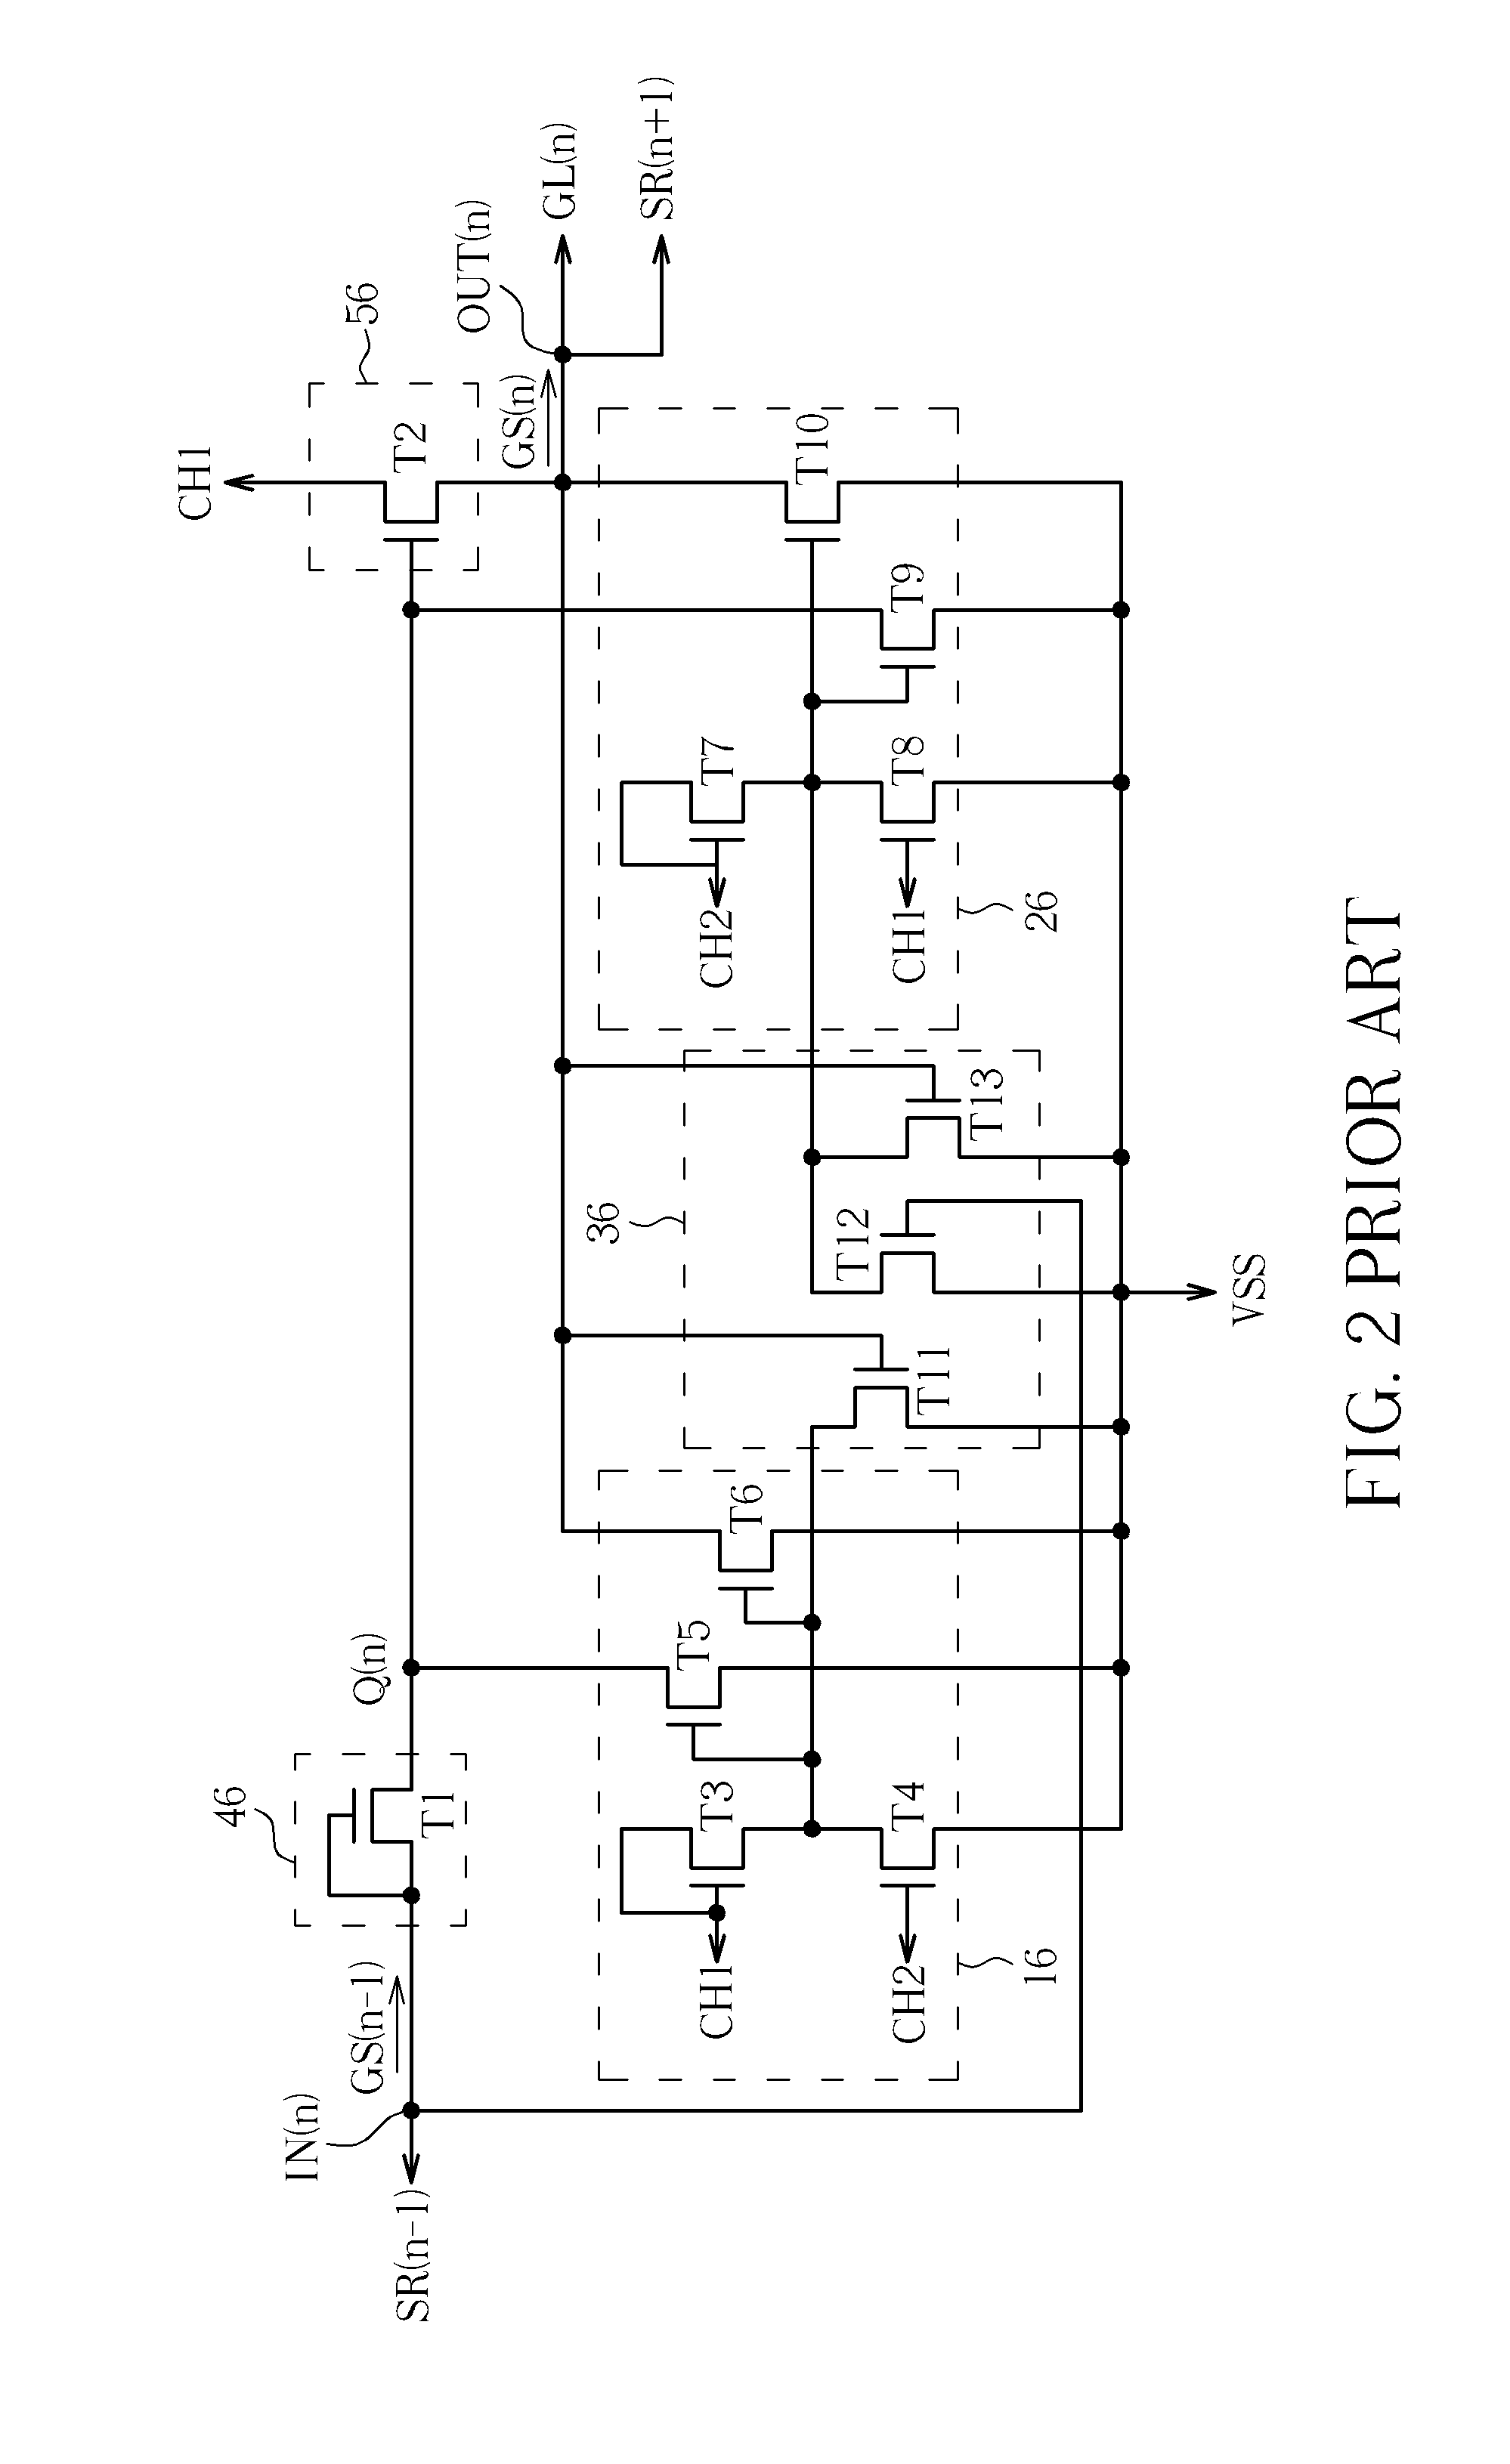 Shift register of LCD devices